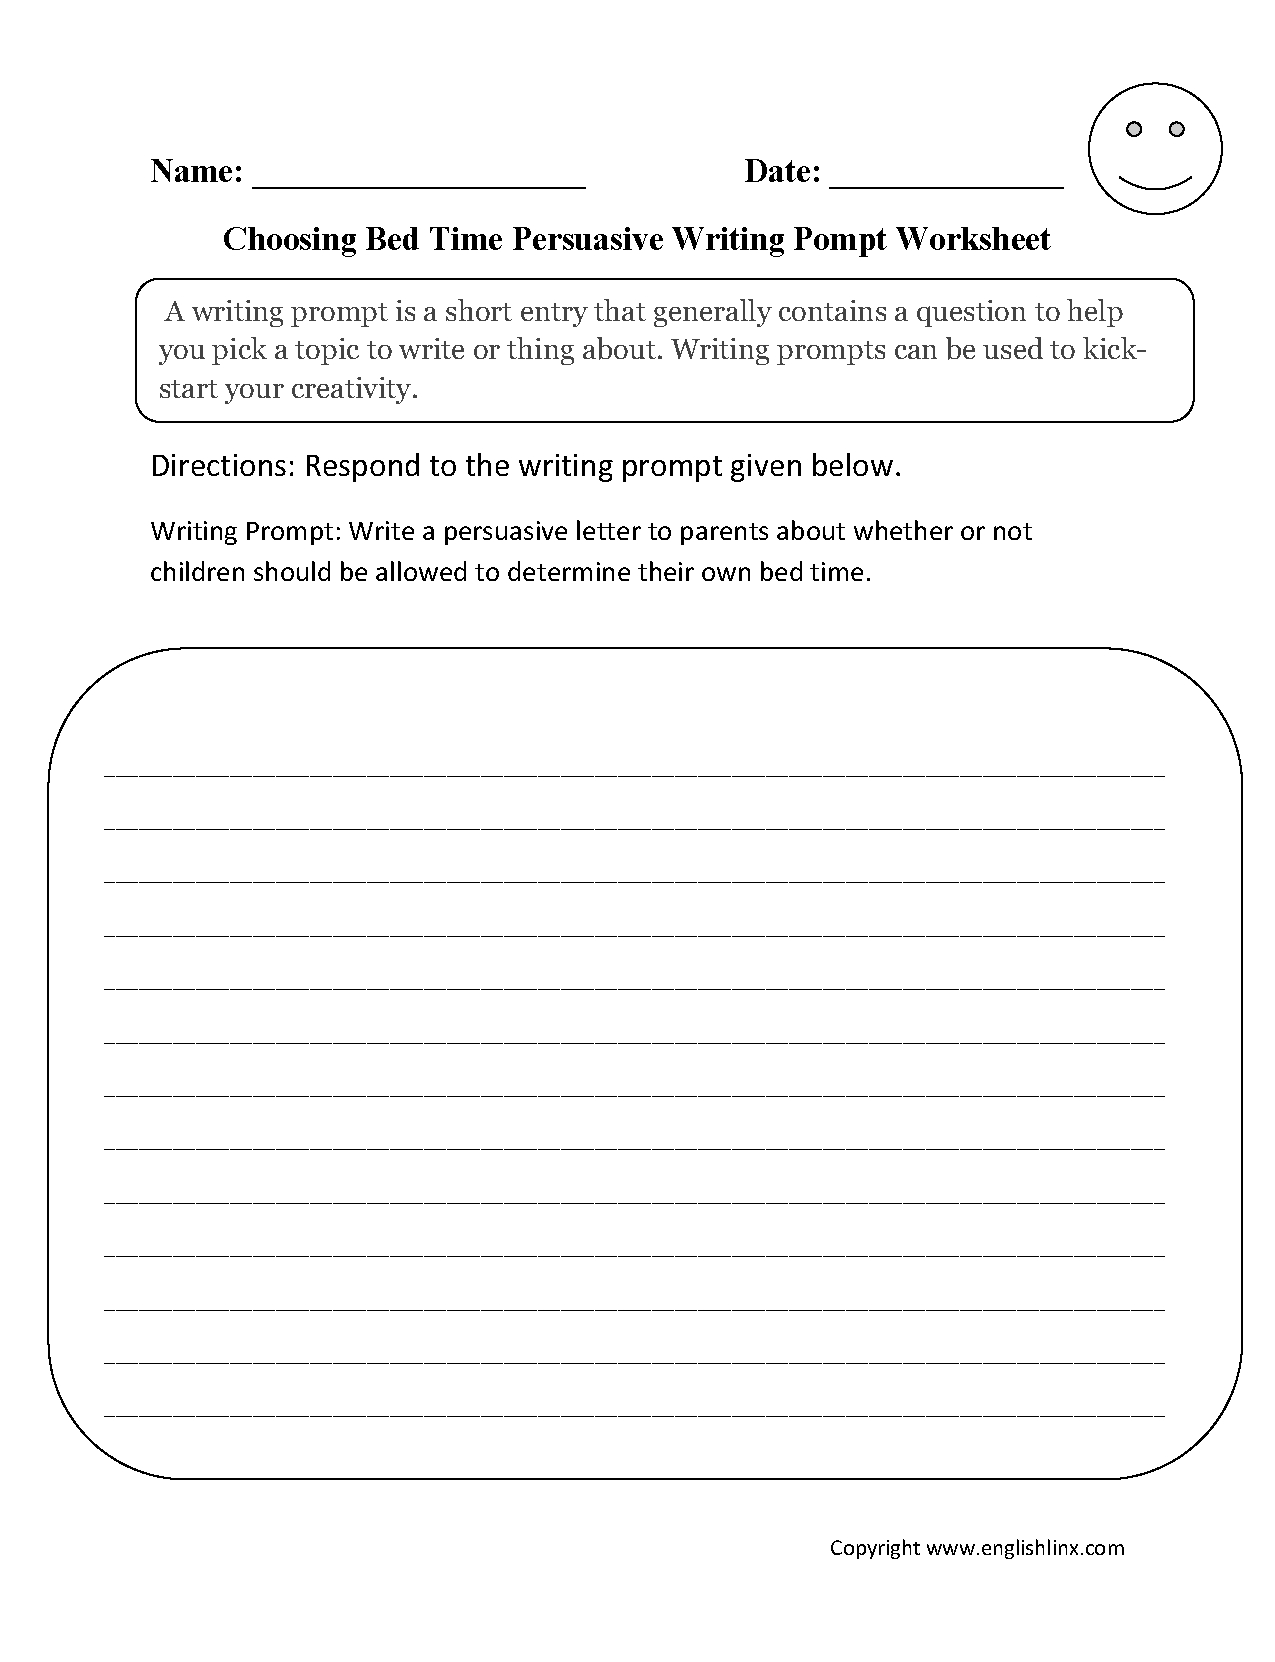 10 Best Writing Ideas For 4Th Grade writing prompts worksheets persuasive writing prompts worksheets 2022